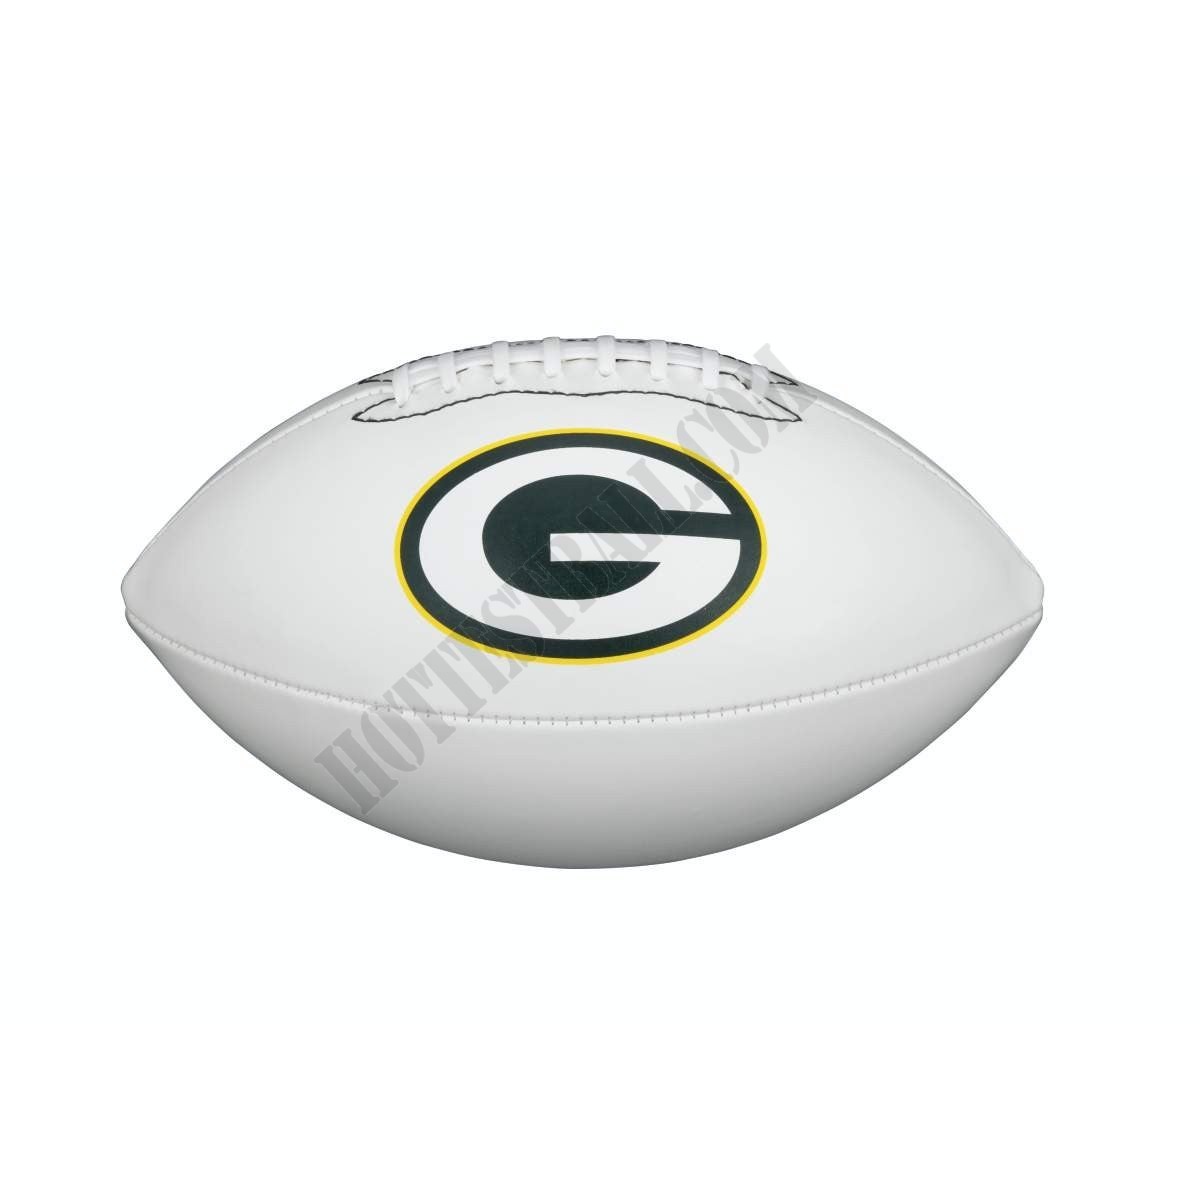 NFL Team Logo Autograph Football - Official, Green Bay Packers ● Wilson Promotions - NFL Team Logo Autograph Football - Official, Green Bay Packers ● Wilson Promotions